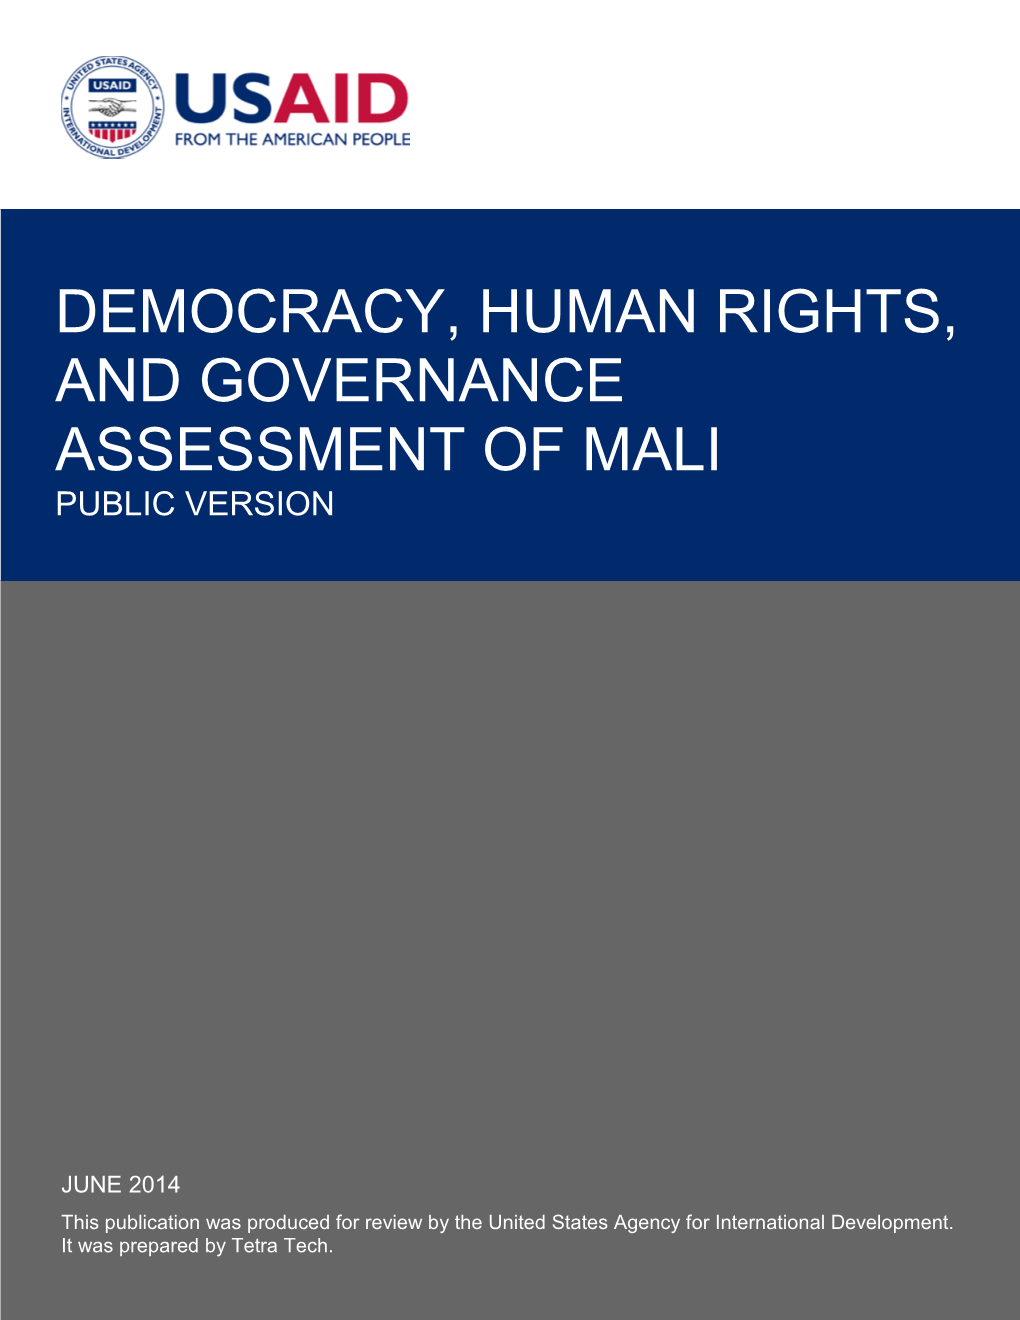 Democracy, Human Rights, and Governance Assessment of Mali Public Version